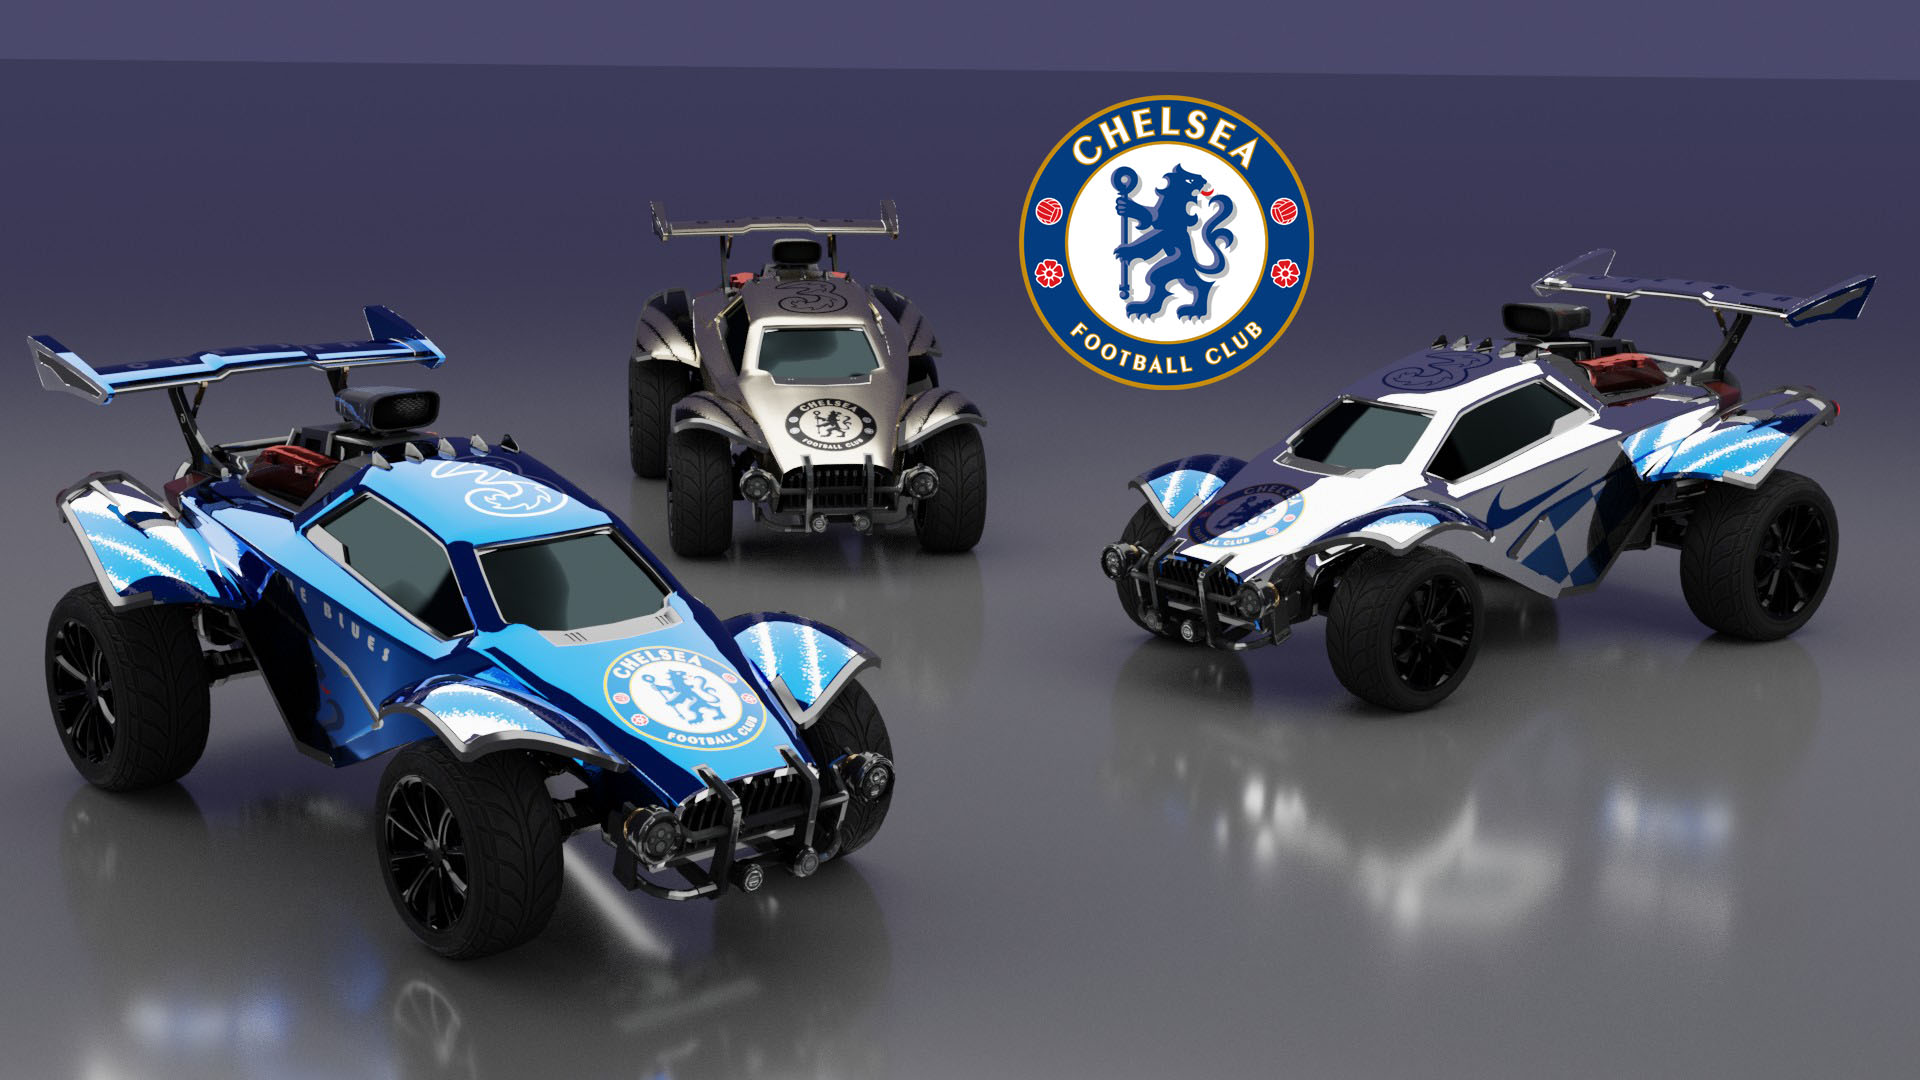 Chelsea Octane home, away and third kit ( adonized )